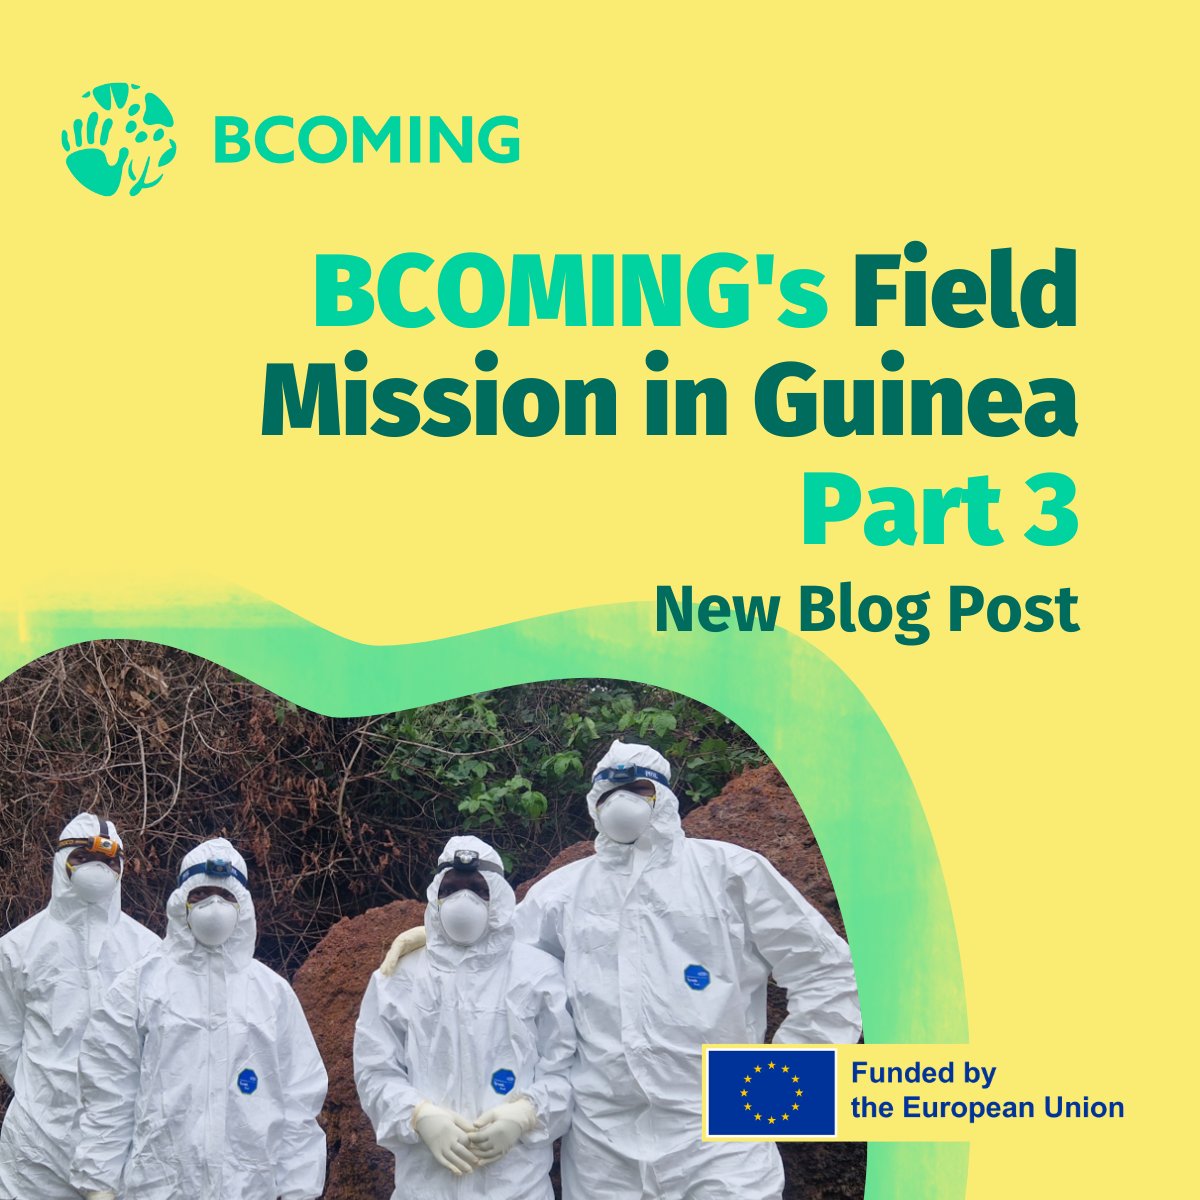 🌿 Our latest blog post on BCOMING's latest field mission in Guinea is now live! 🇬🇳 Read the full blog here: bit.ly/3wAA4Ek Stay tuned for more updates as we continue our research in biodiversity and disease prevention🦇📝 #BCOMING #FieldMission #Guinea #Biodiversity